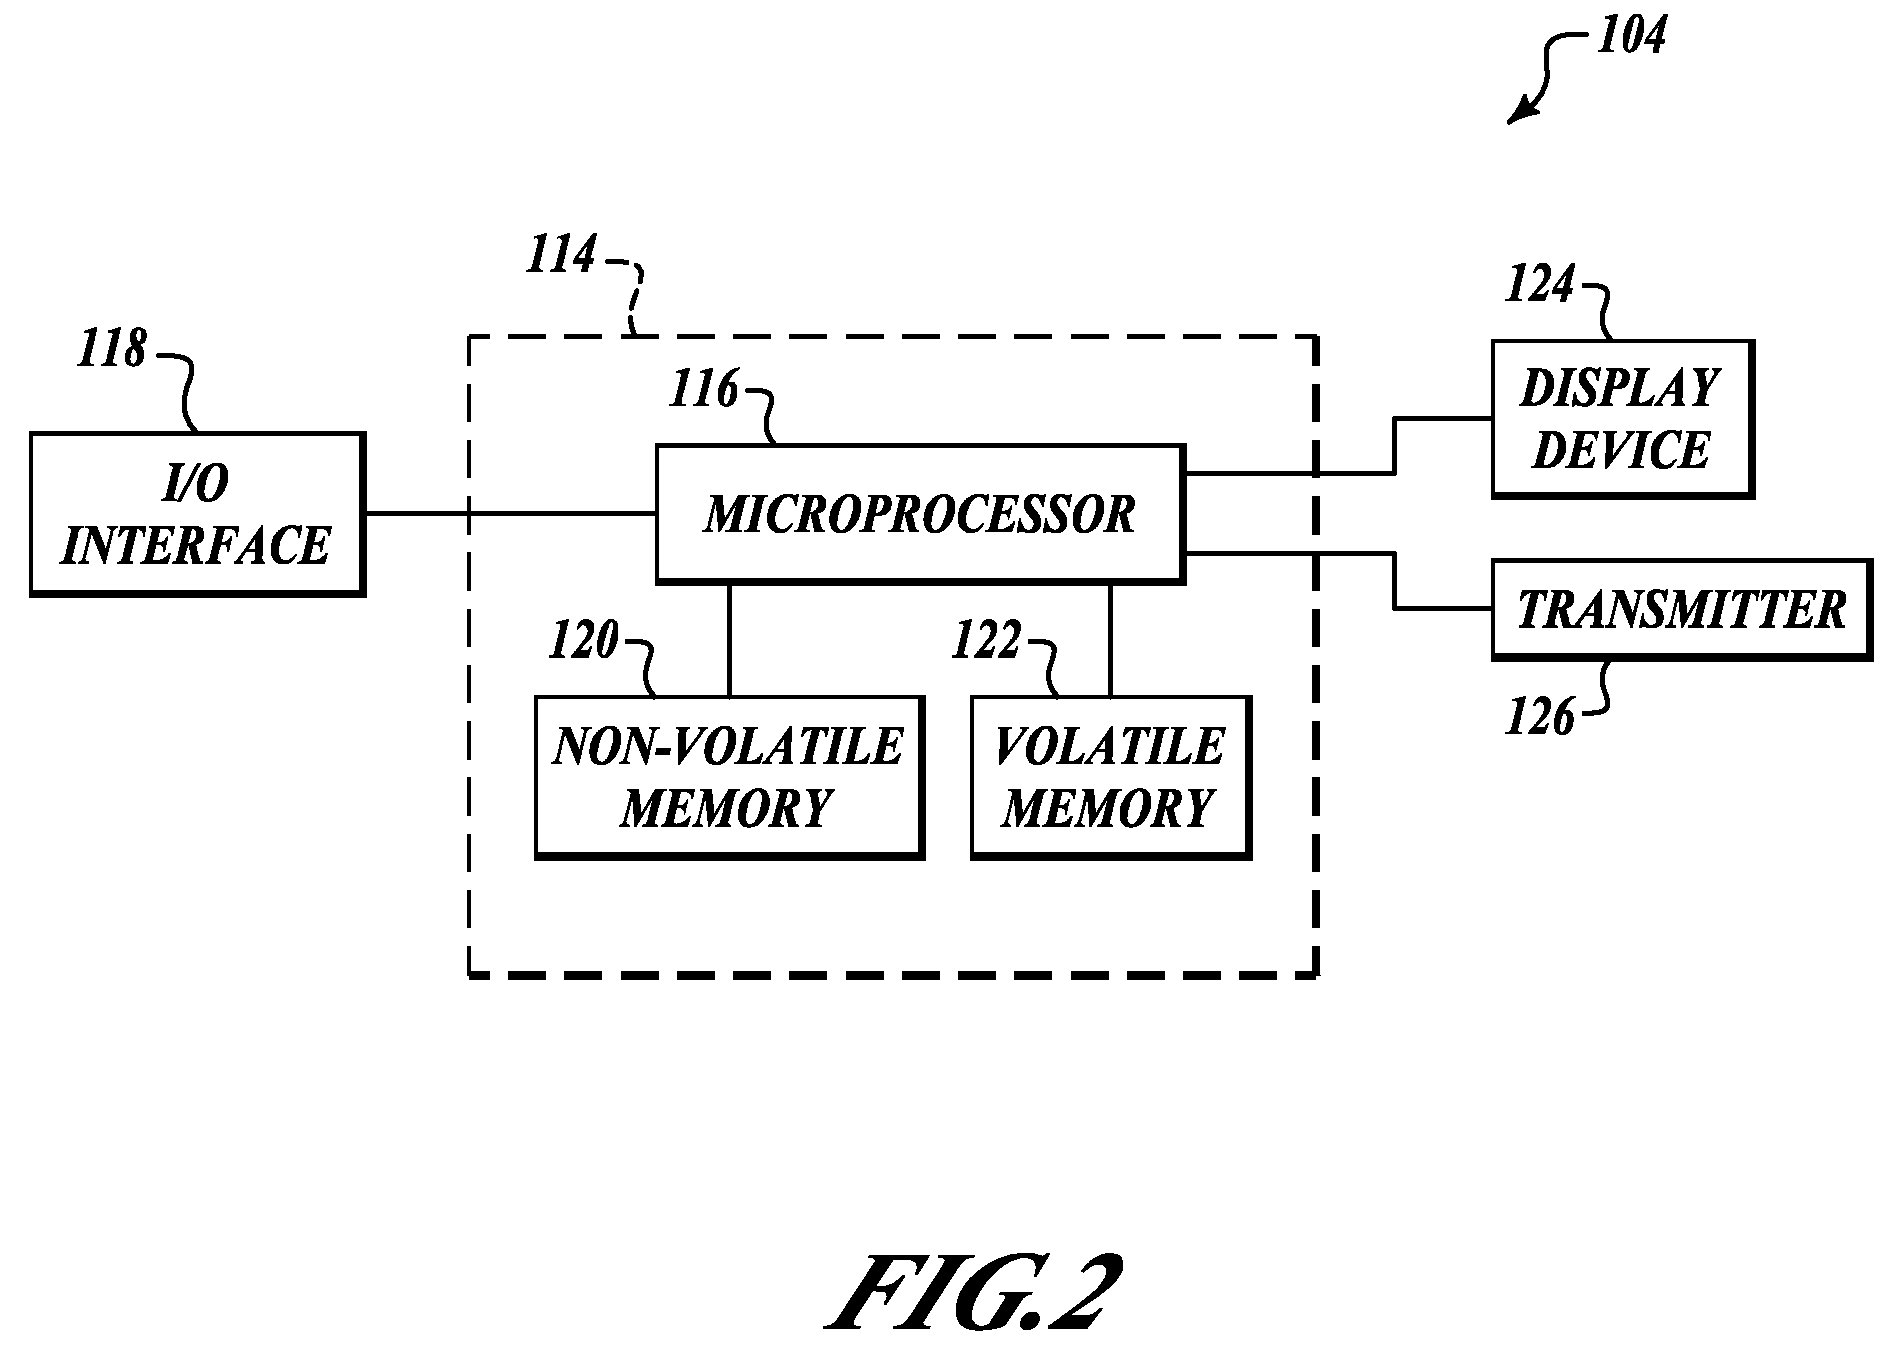 Programmable remote control and methods of using same